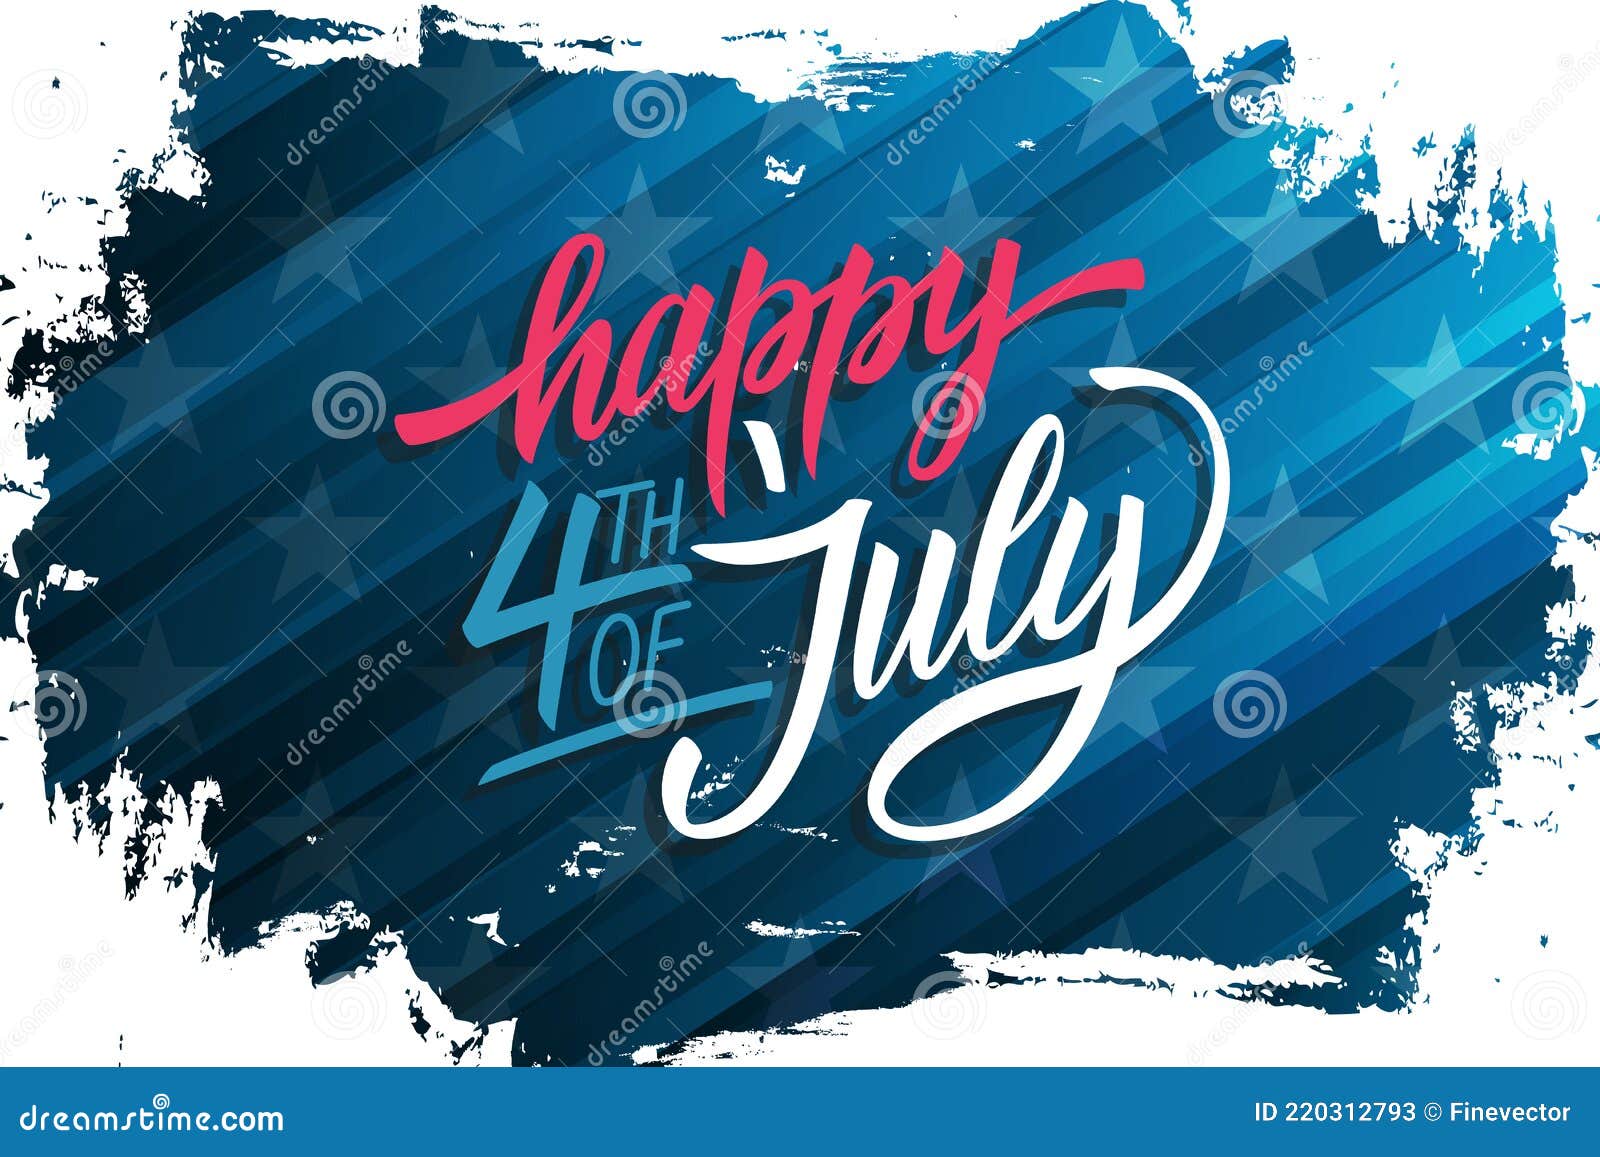 usa independence day celebrate banner with brush stroke background and hand lettering text happy 4th of july.